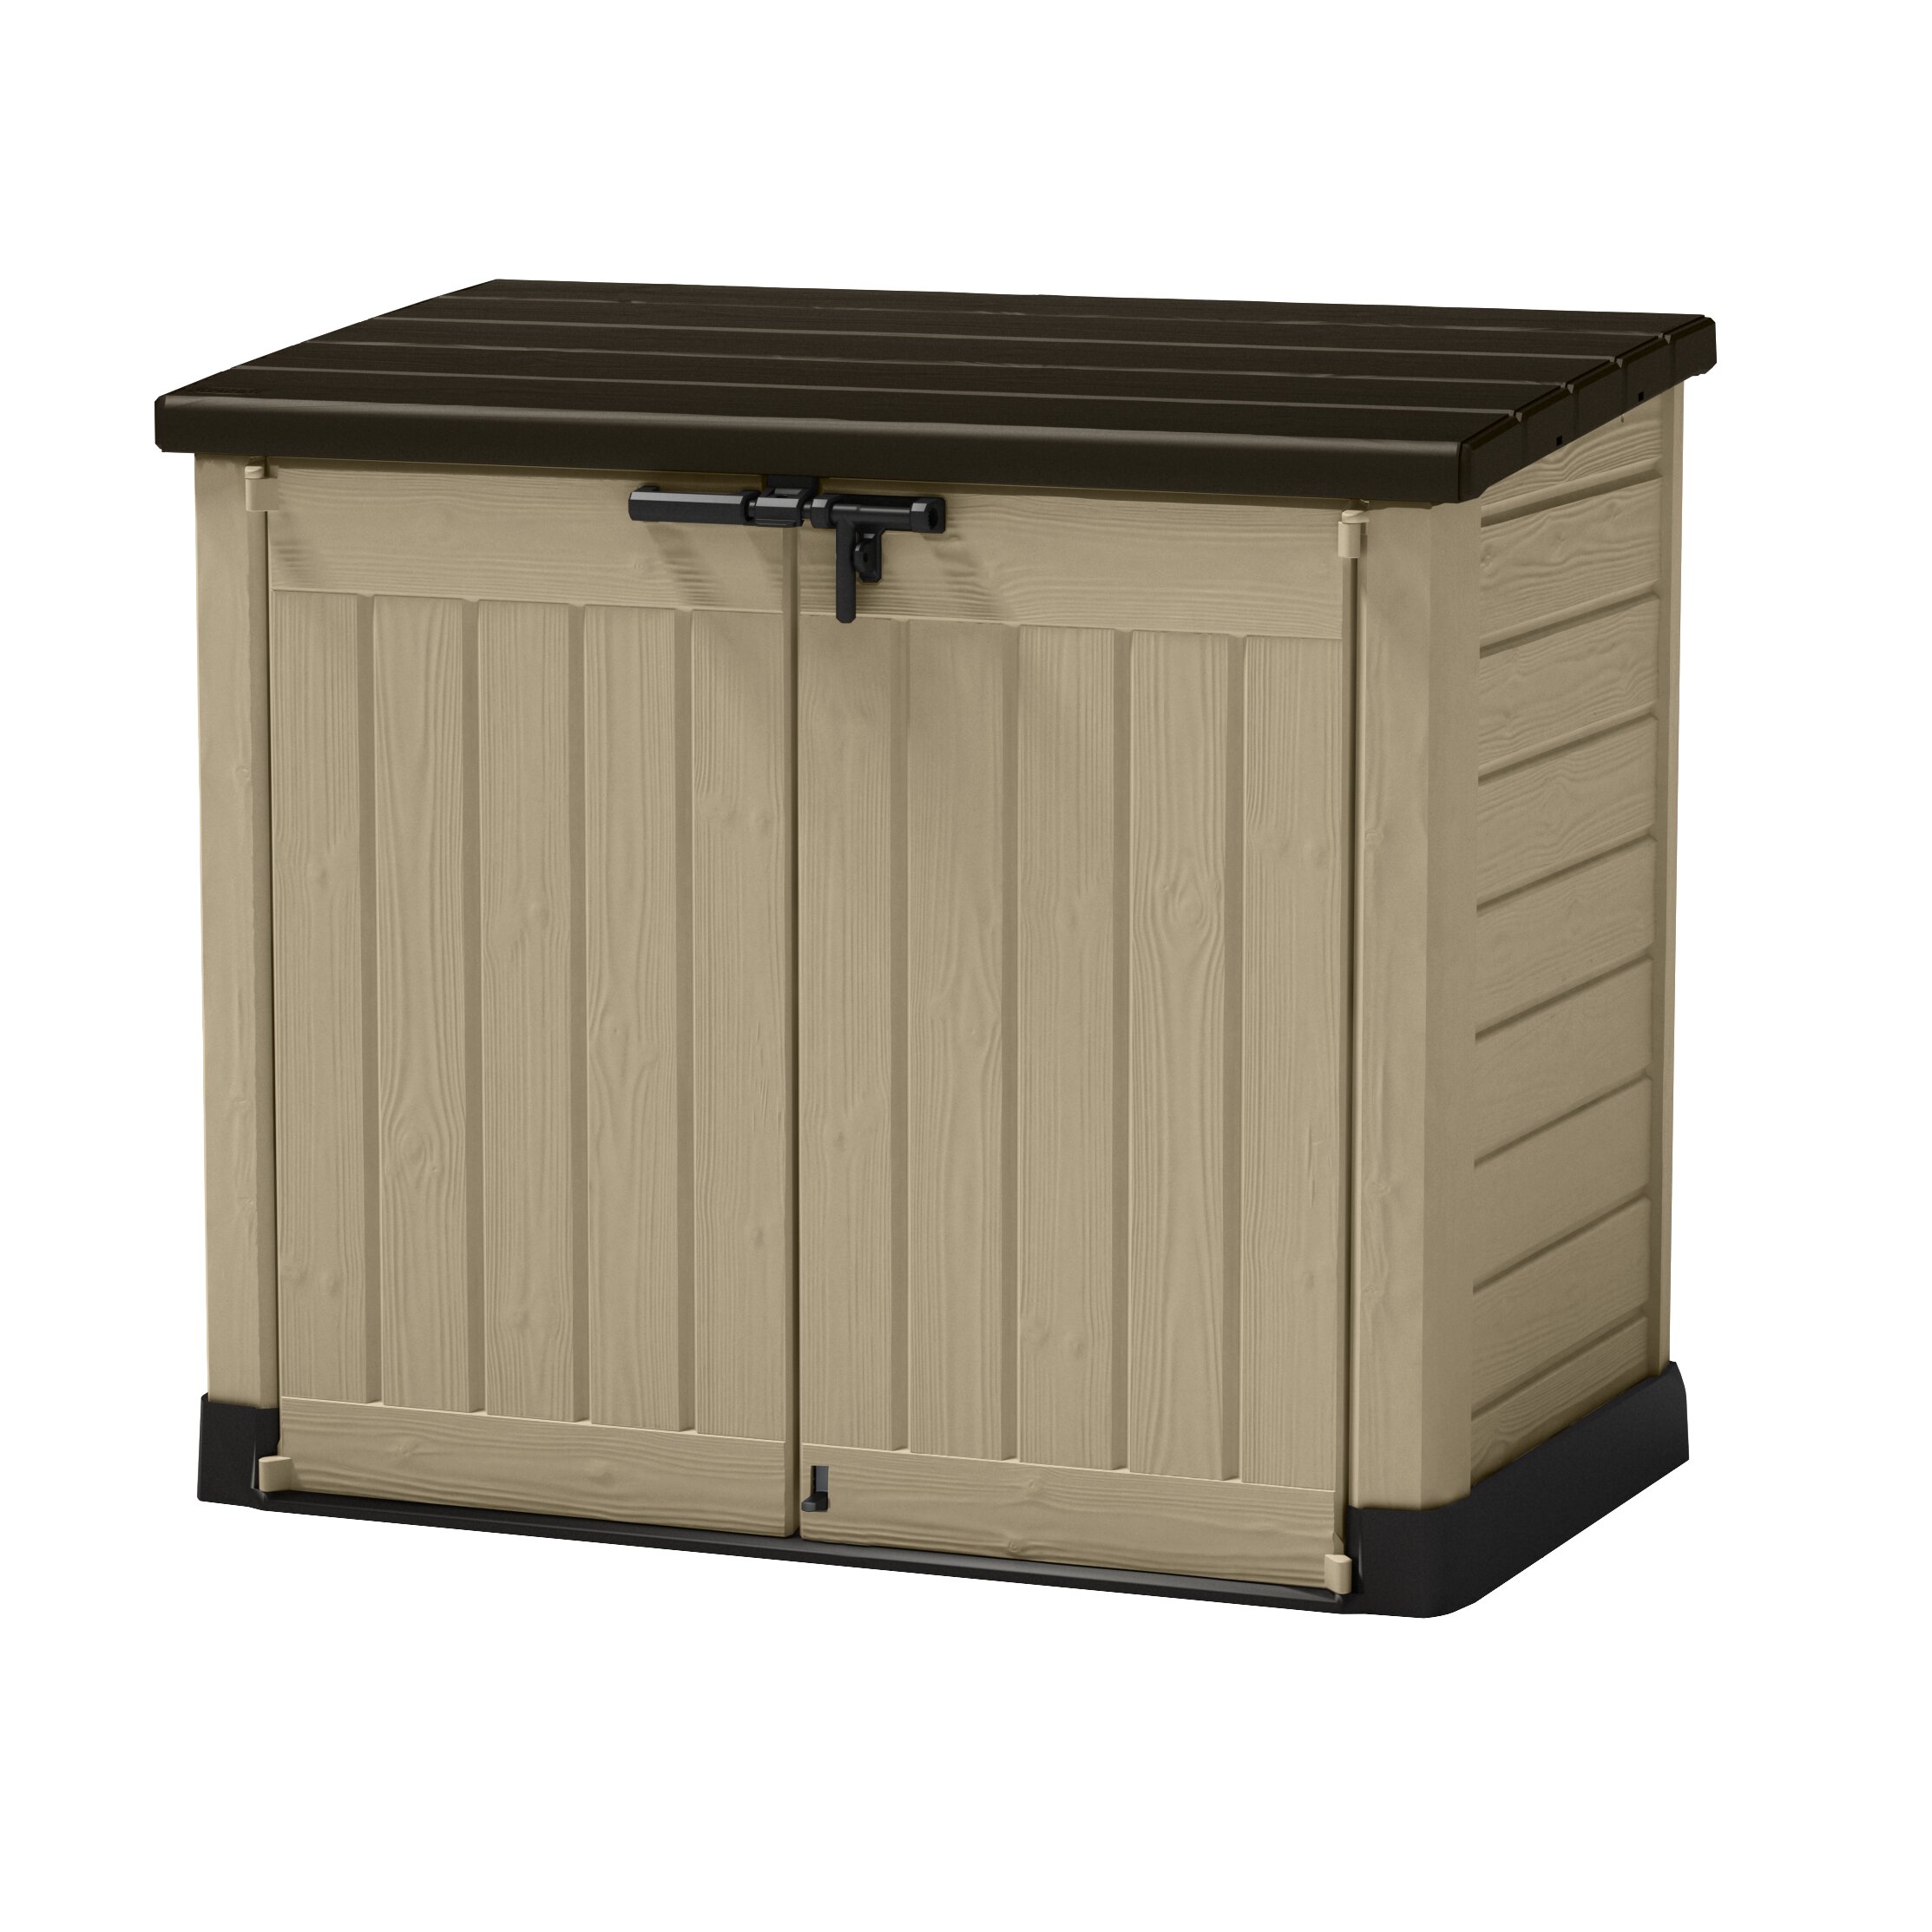 Keter Store-It-Out Max 5 Ft. W x 3 Ft. D Plastic Storage Shed 